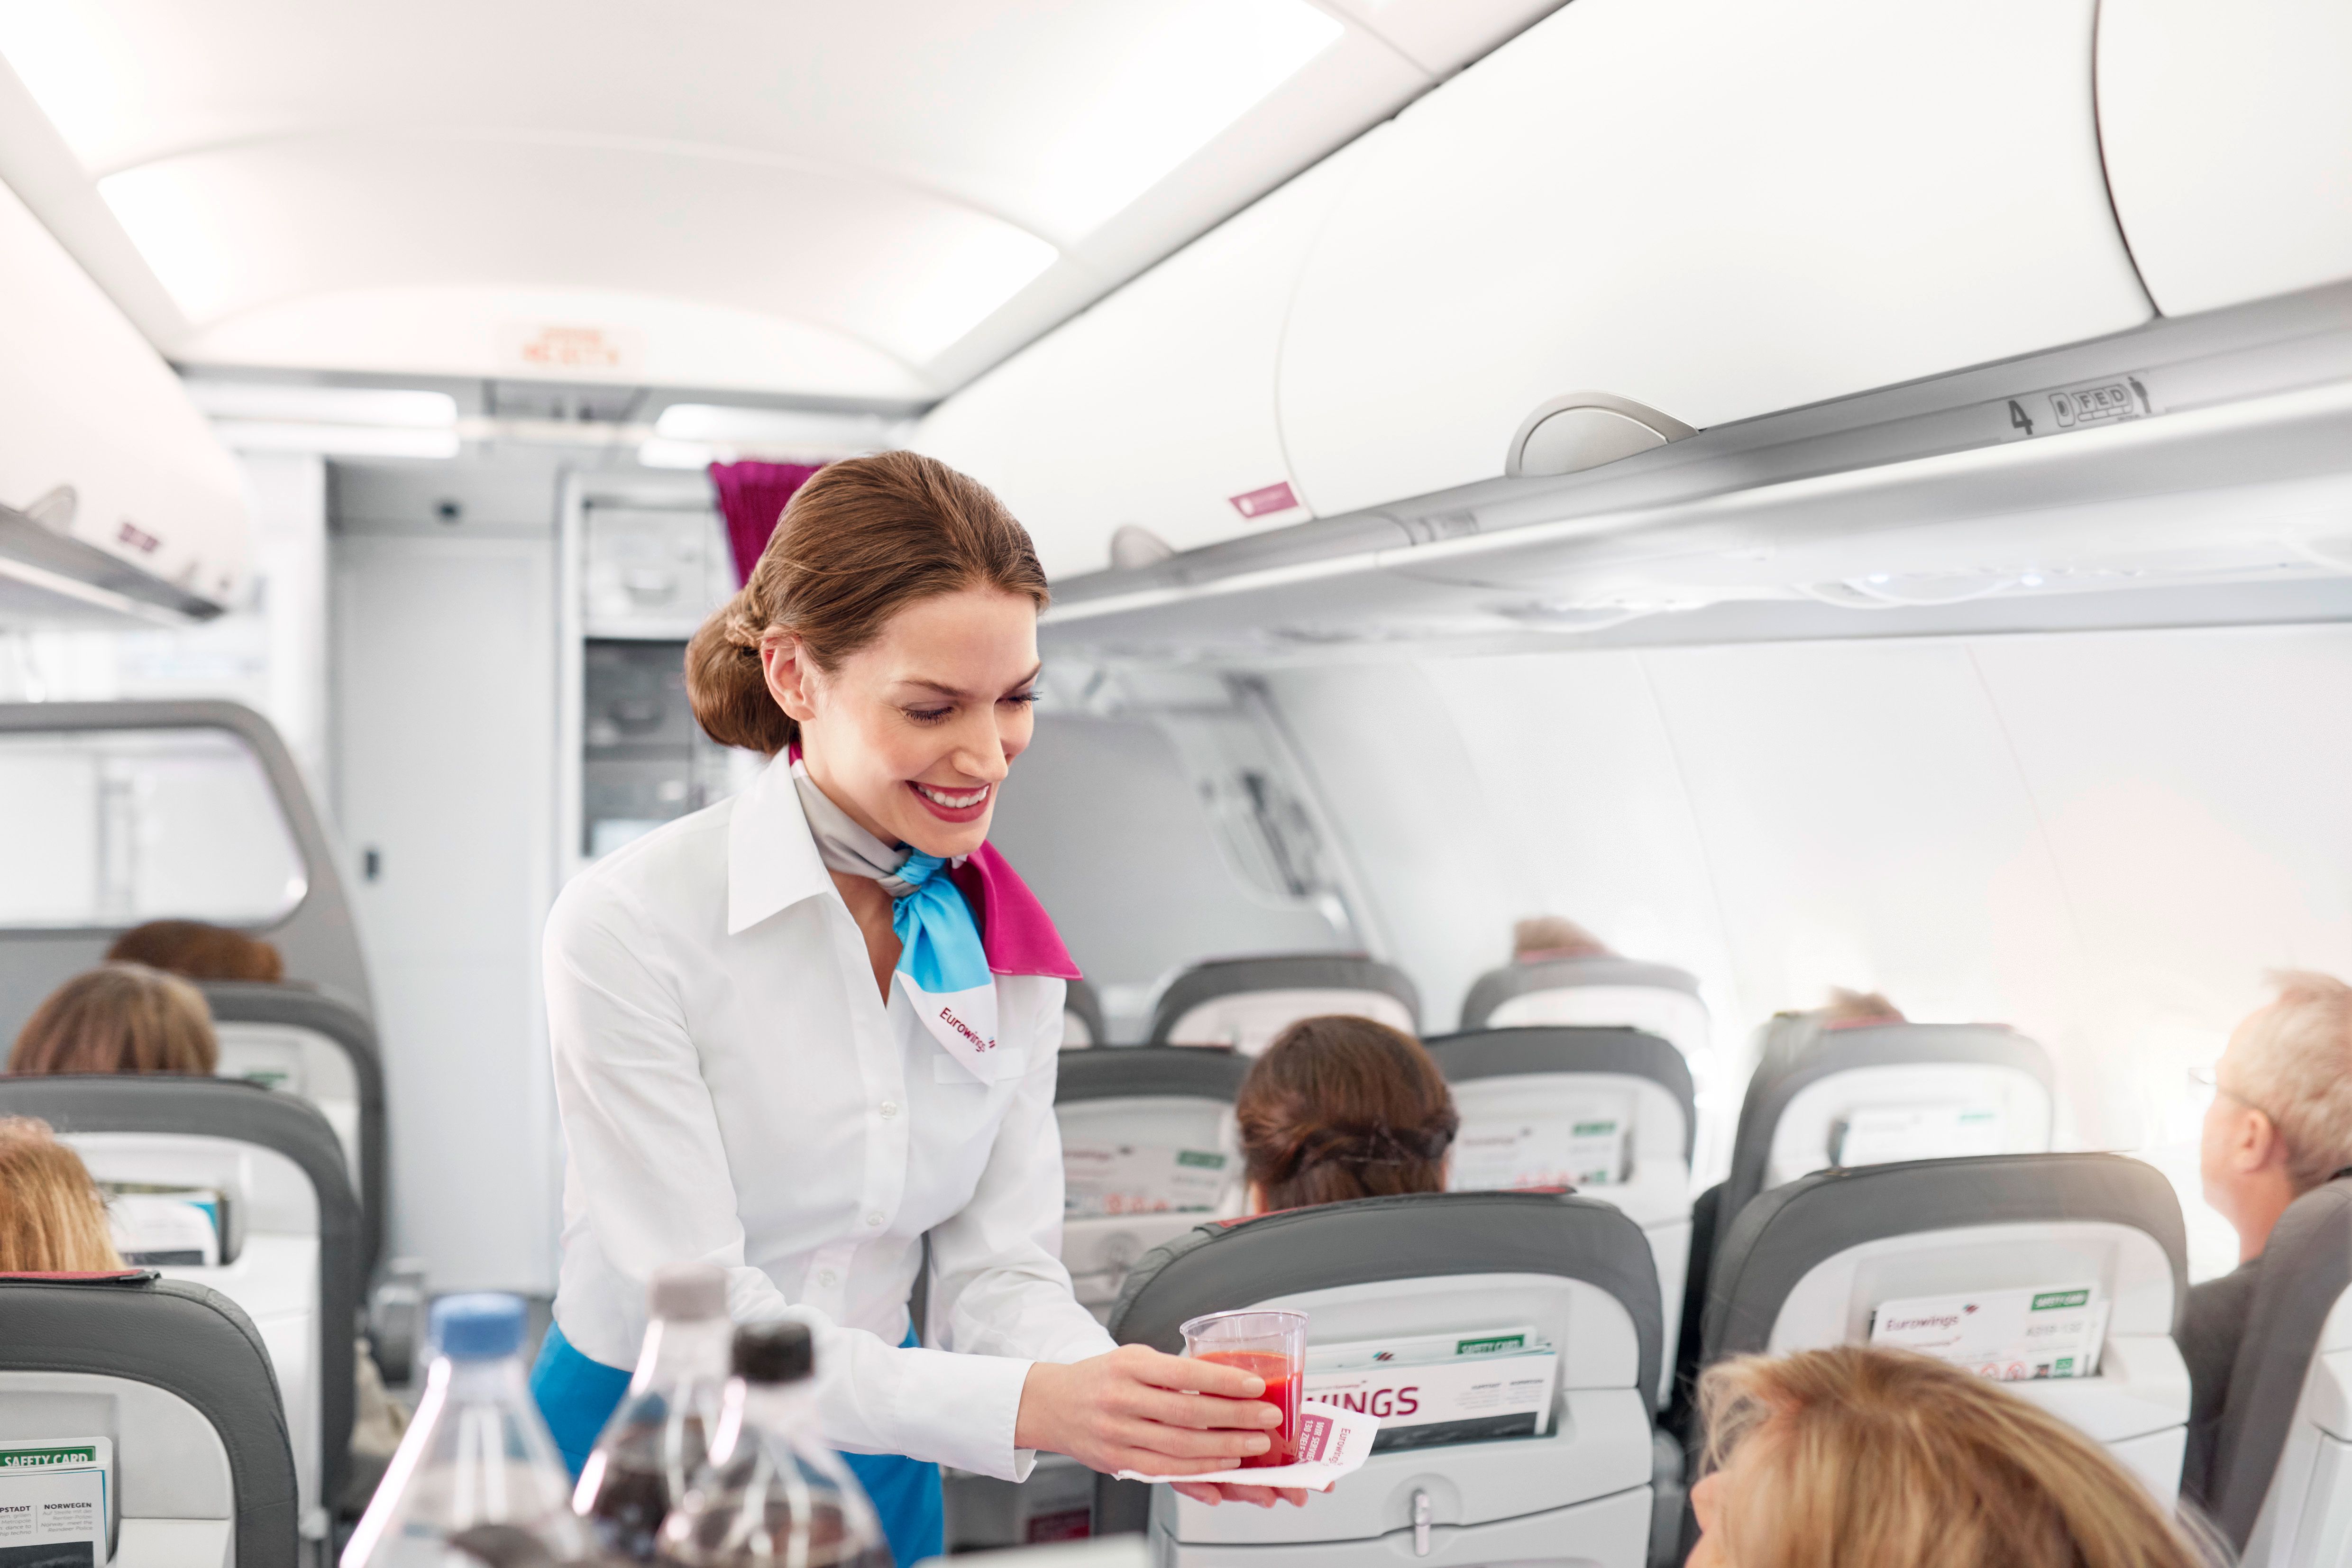 Becoming a flight attendant is more difficult than getting into Harvard